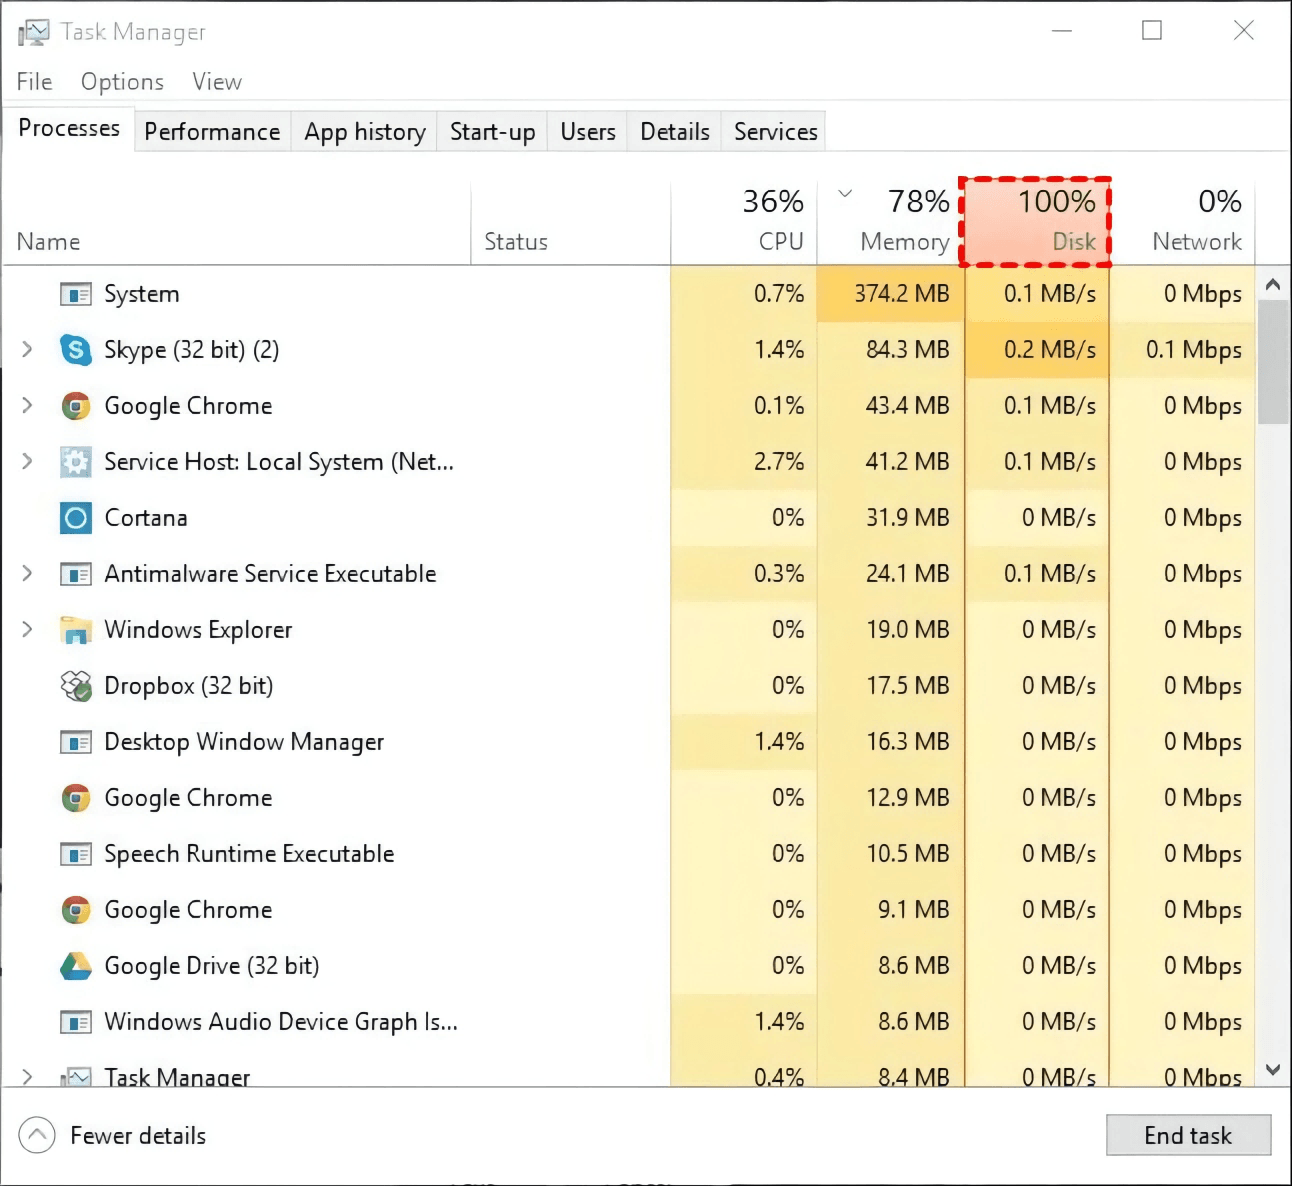 Disk Showing 100% in Task Manager